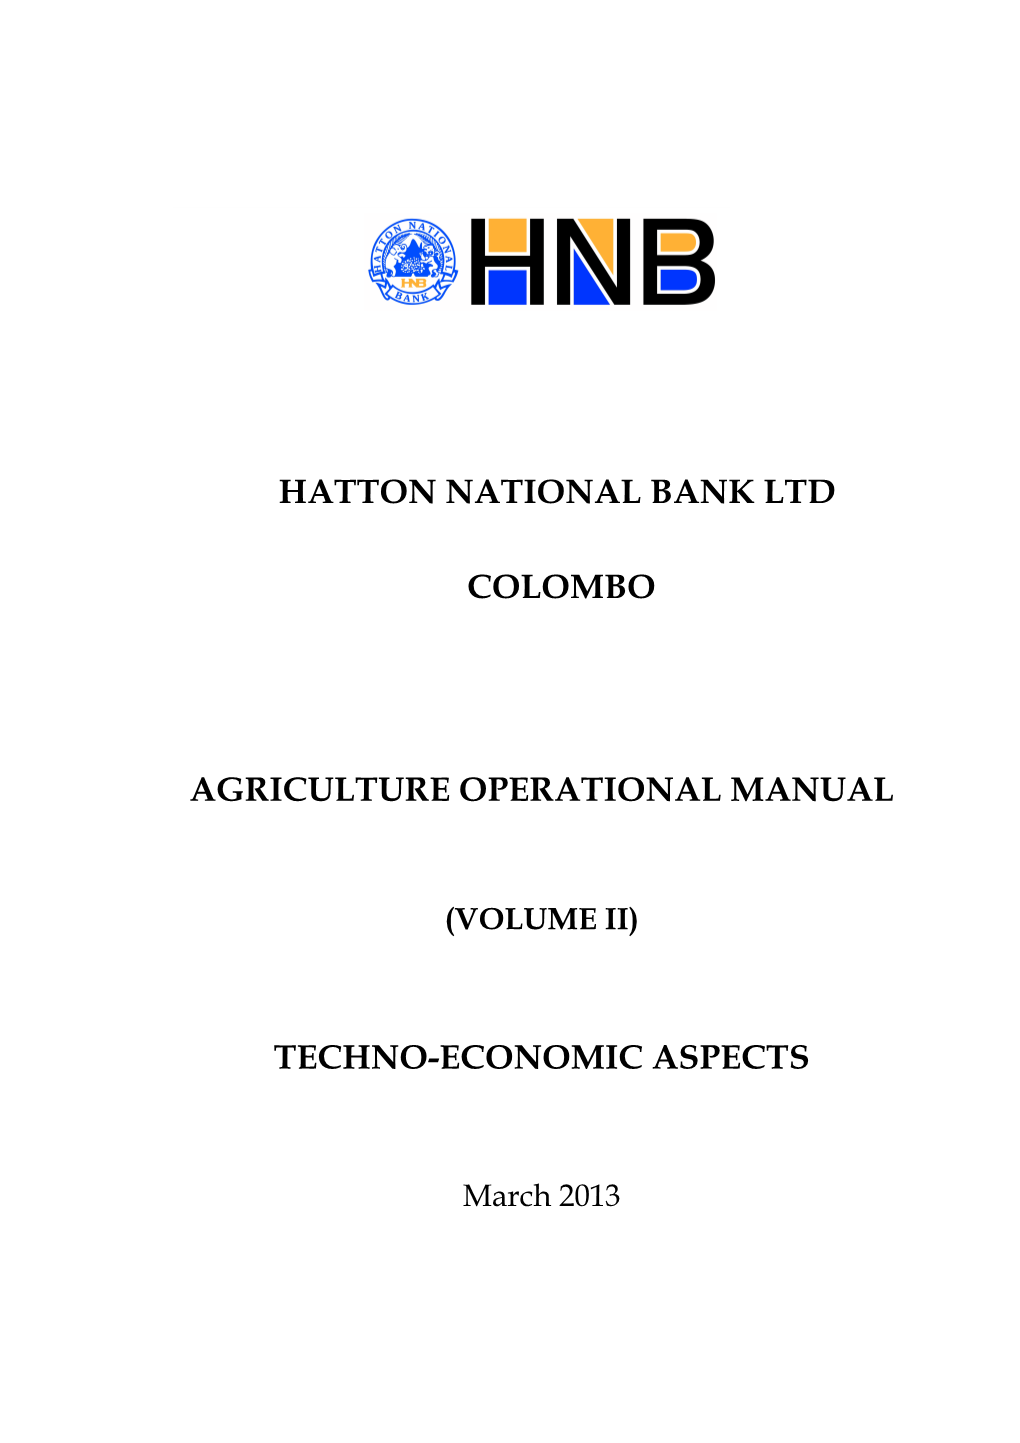 Hatton National Bank Ltd Colombo Agriculture Operational Manual Techno-Economic Aspects